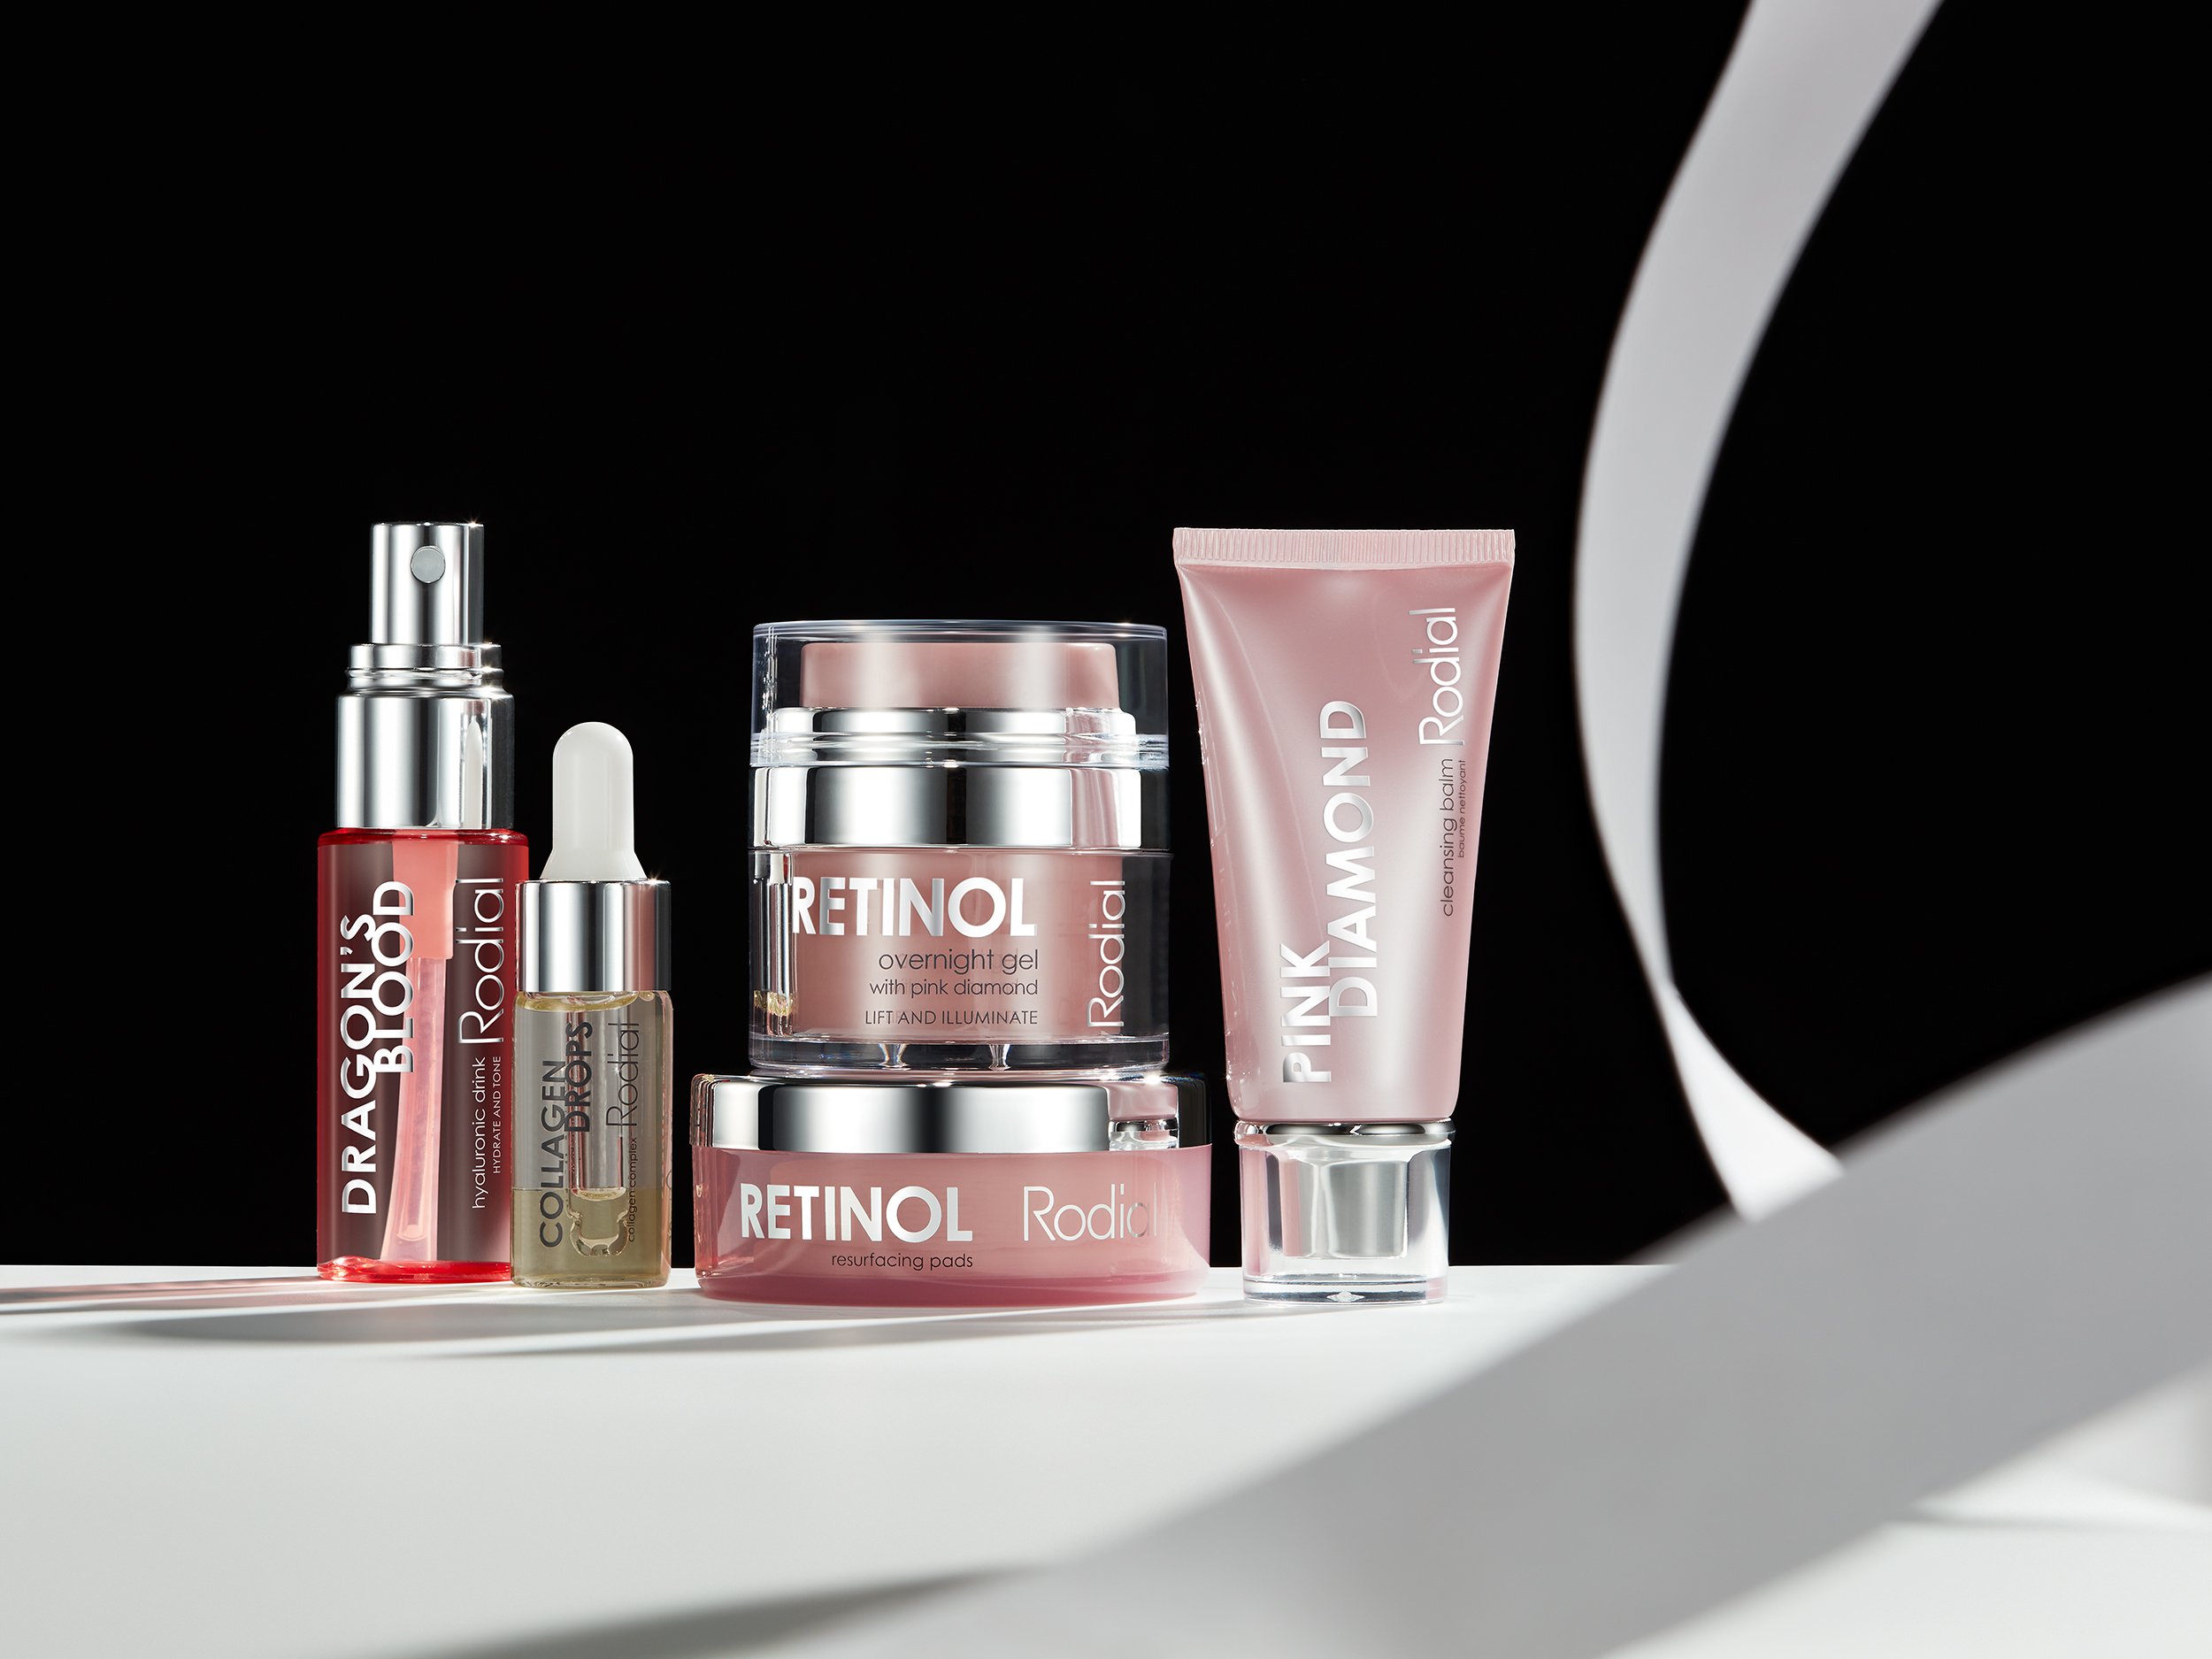 Rodial  - Social media cosmetics photography by Simon Lyle Ritchie